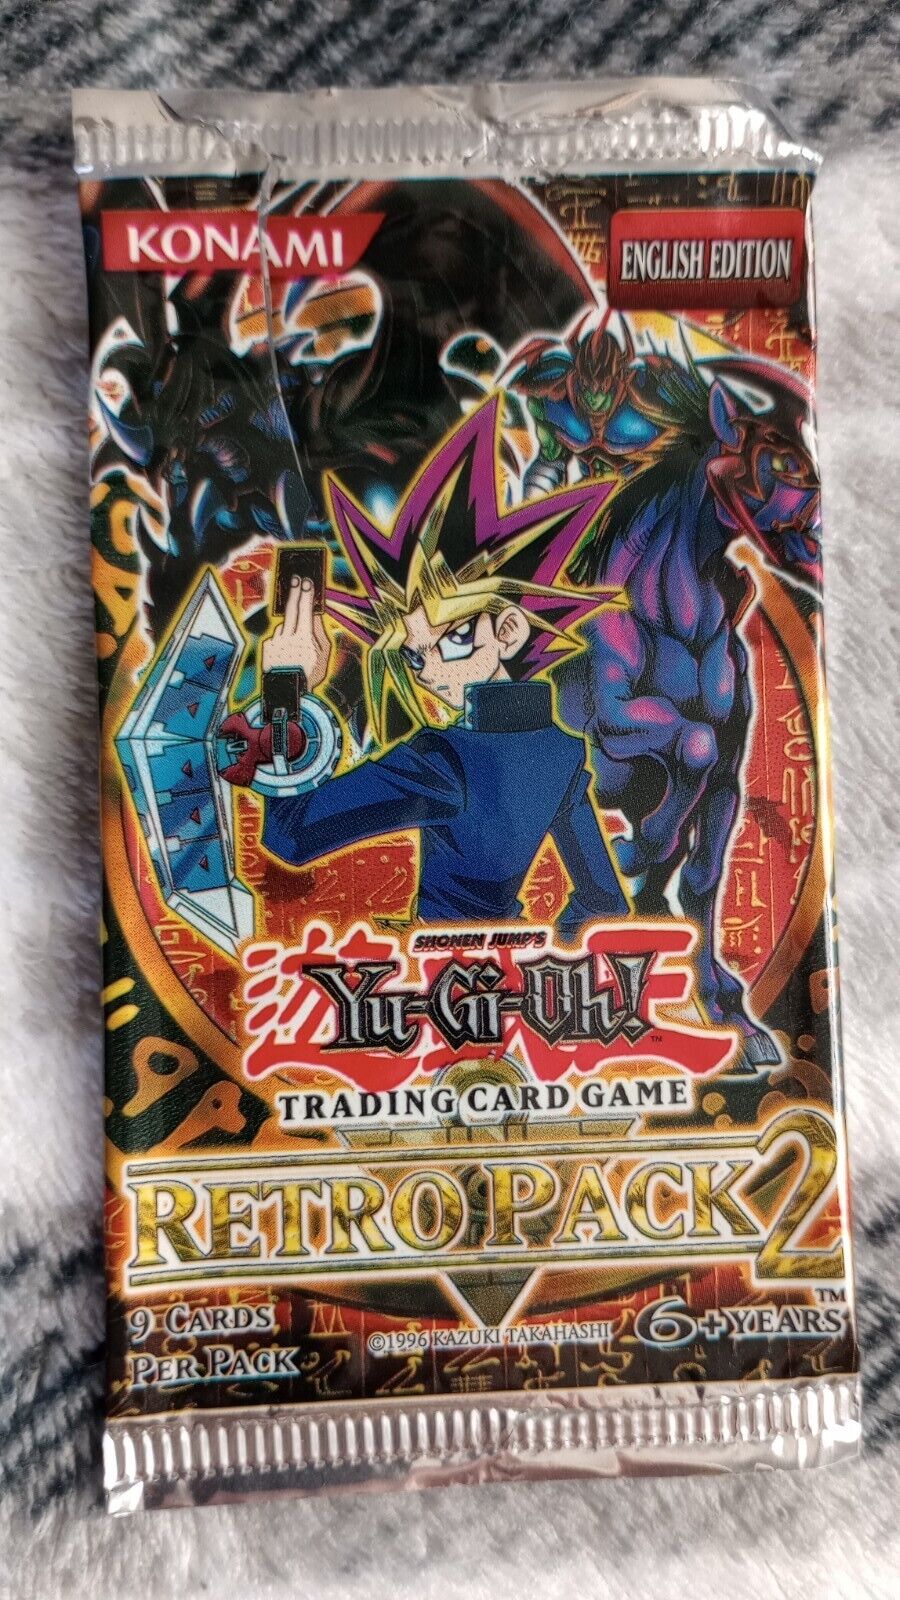 Yugioh - 1x Retro Pack 2 - Original Unlimited Empty Opened Booster Pack 